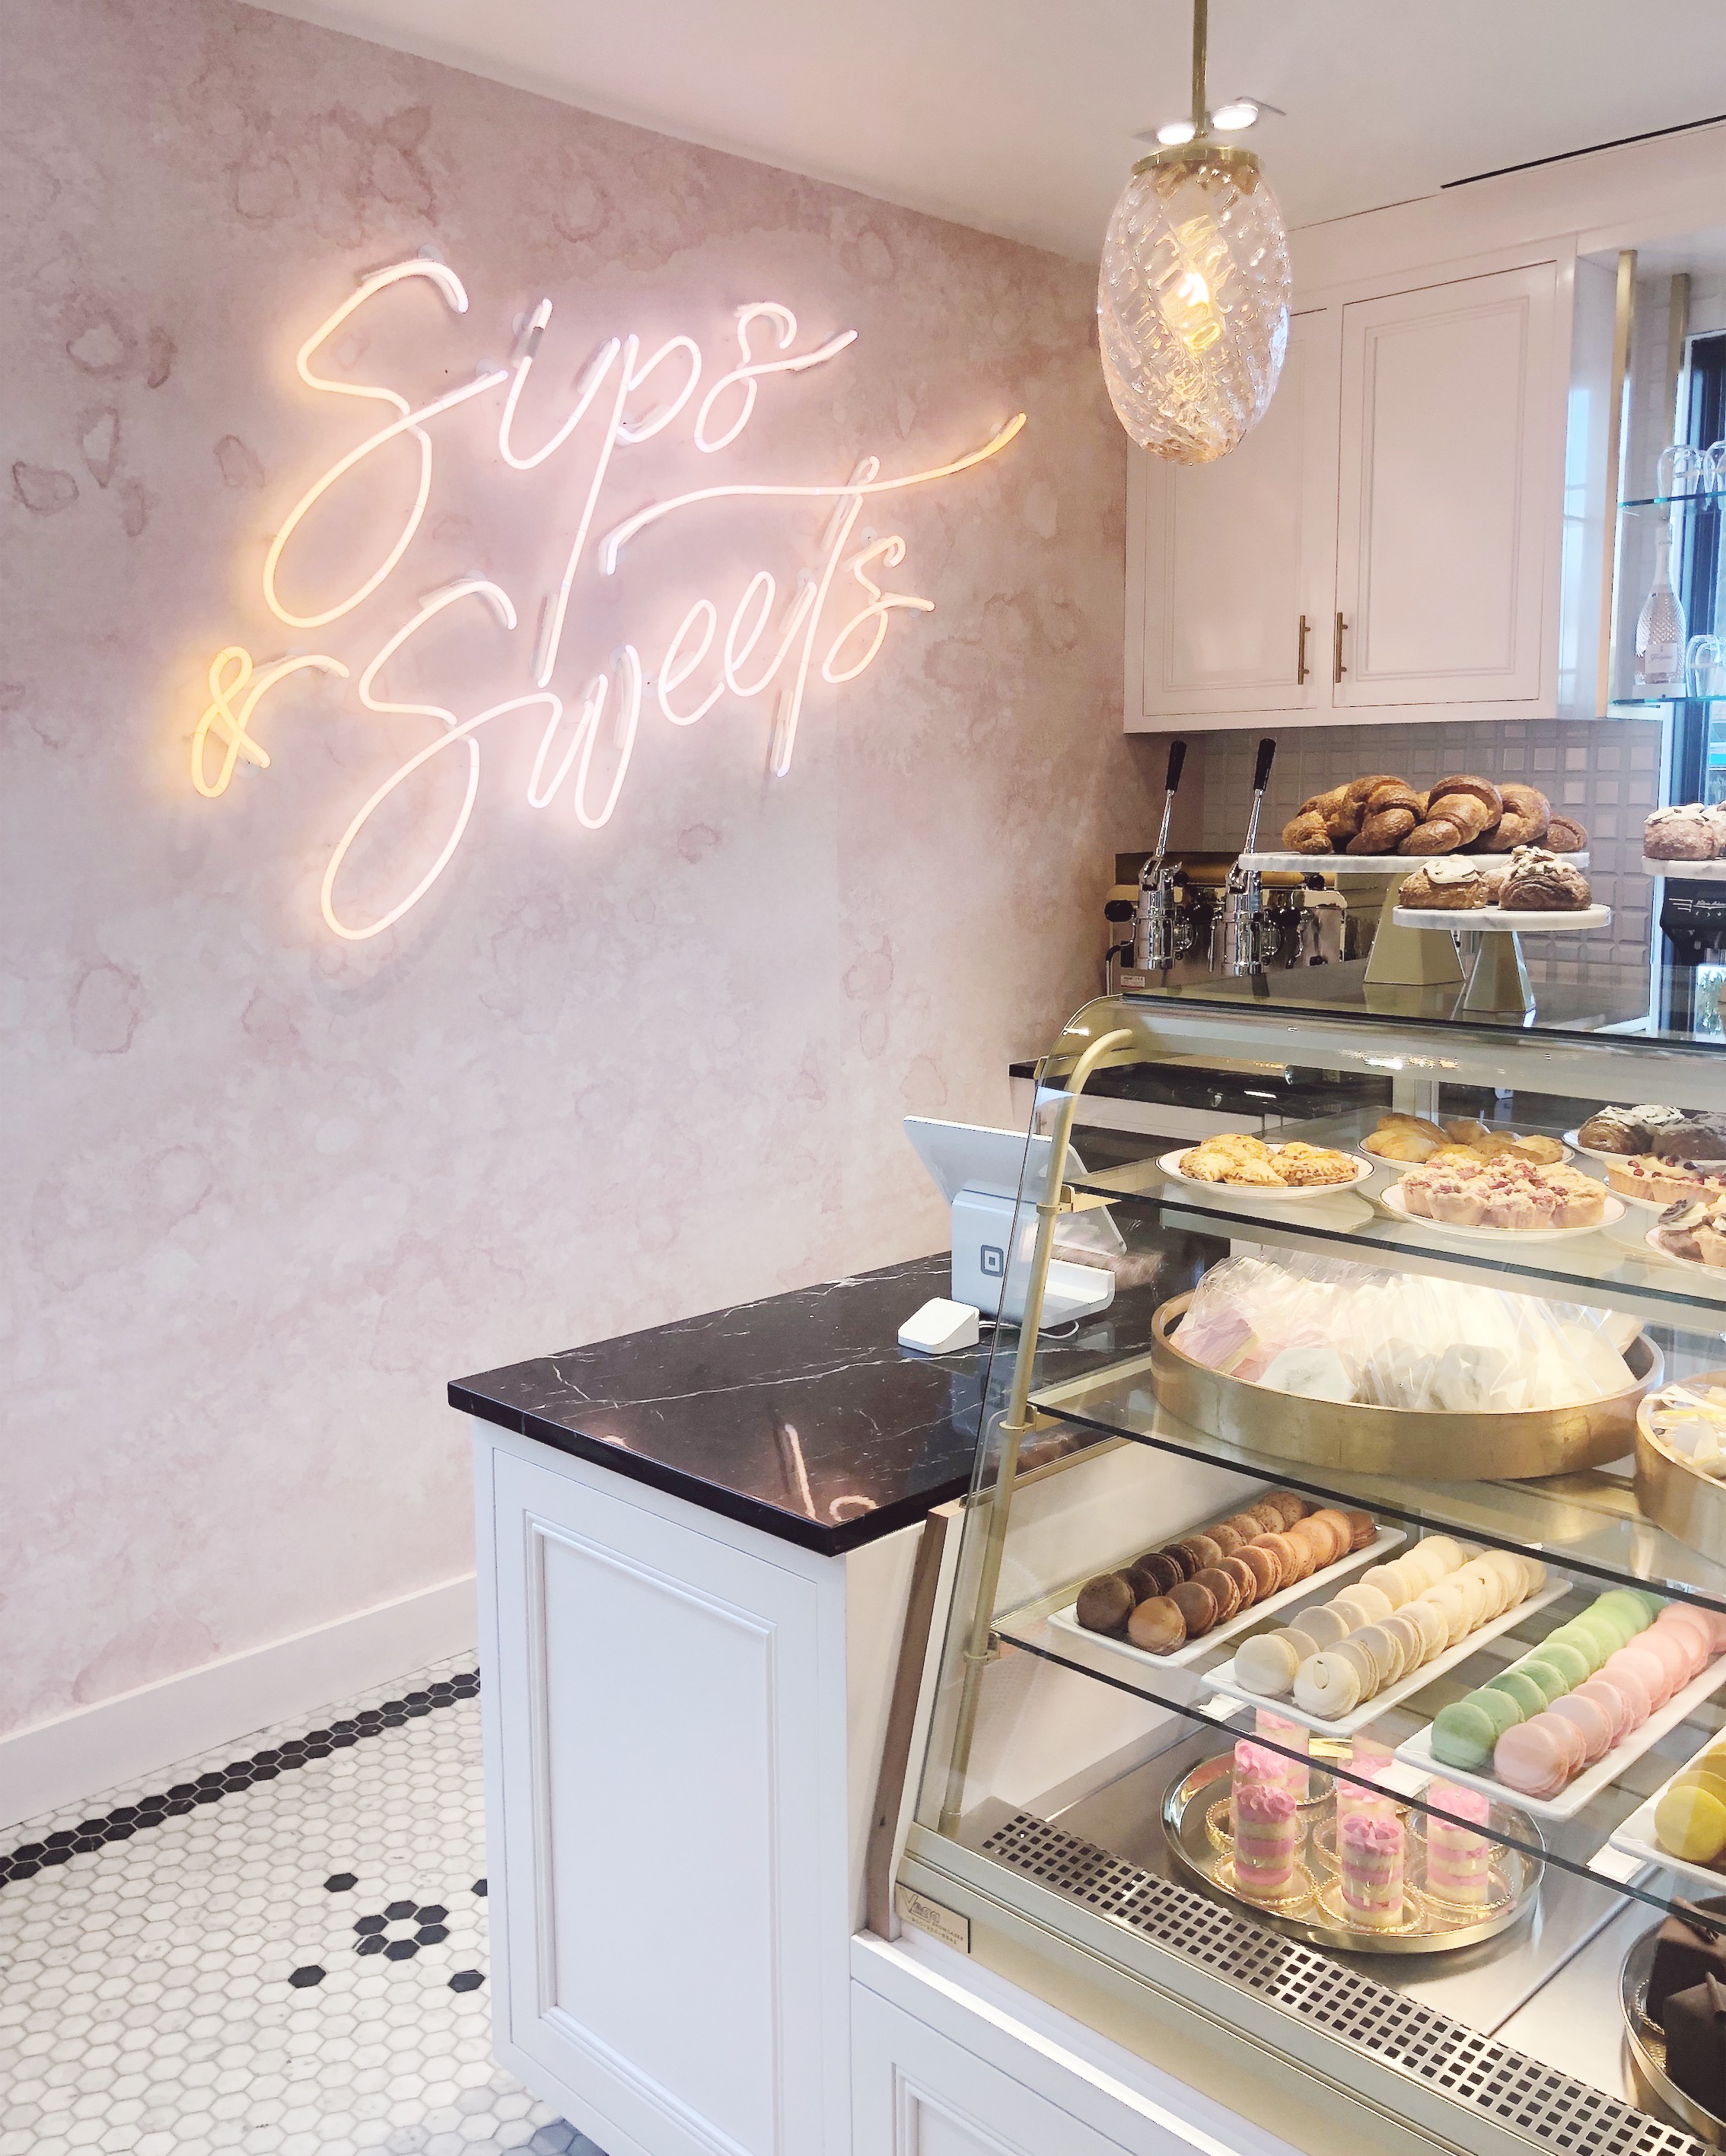 kendra scott sips and sweets cafe